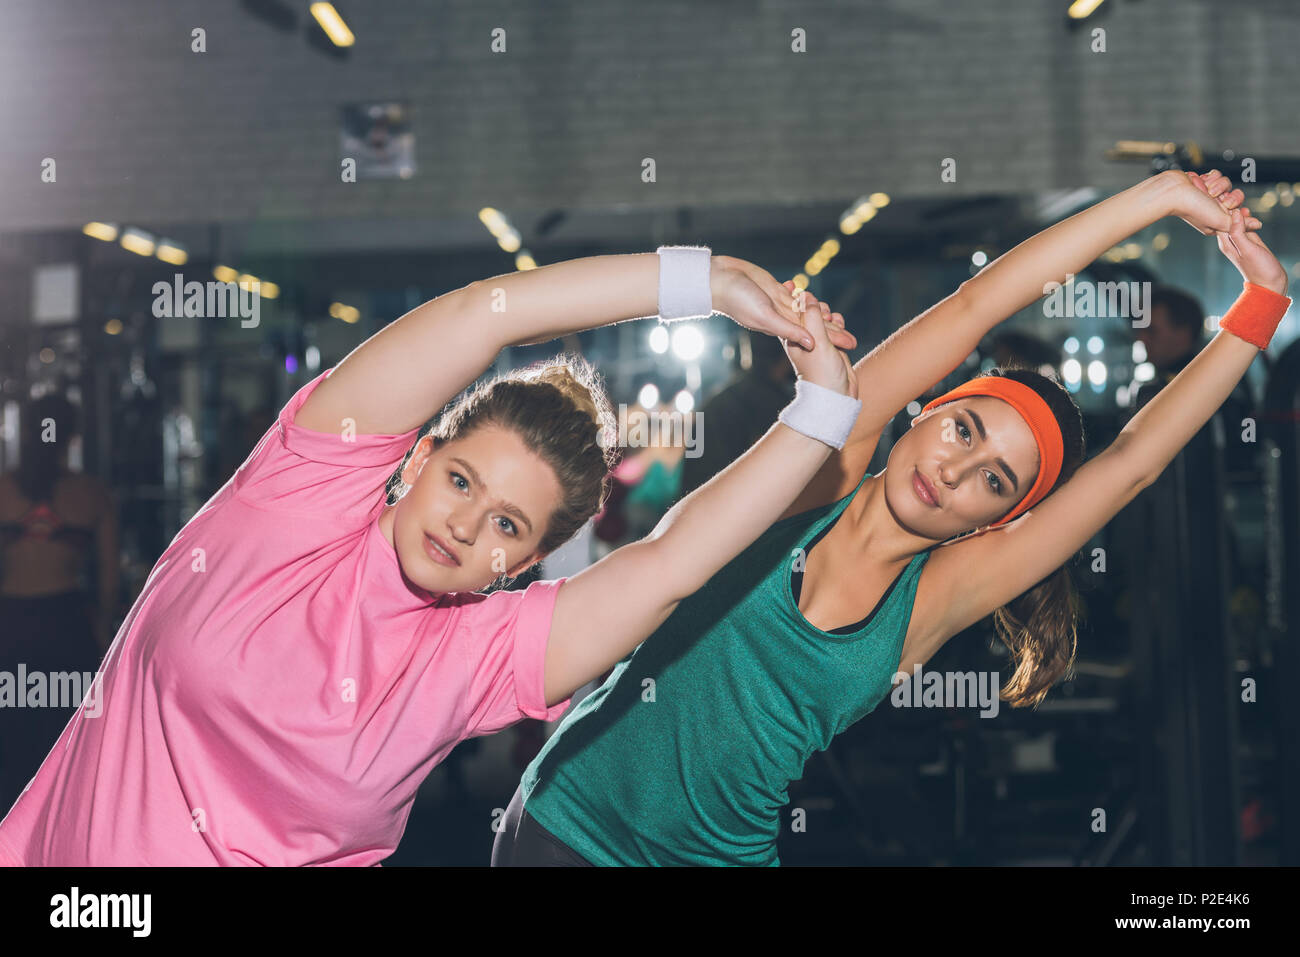 women at gym doing stretching exercises Stock Photo